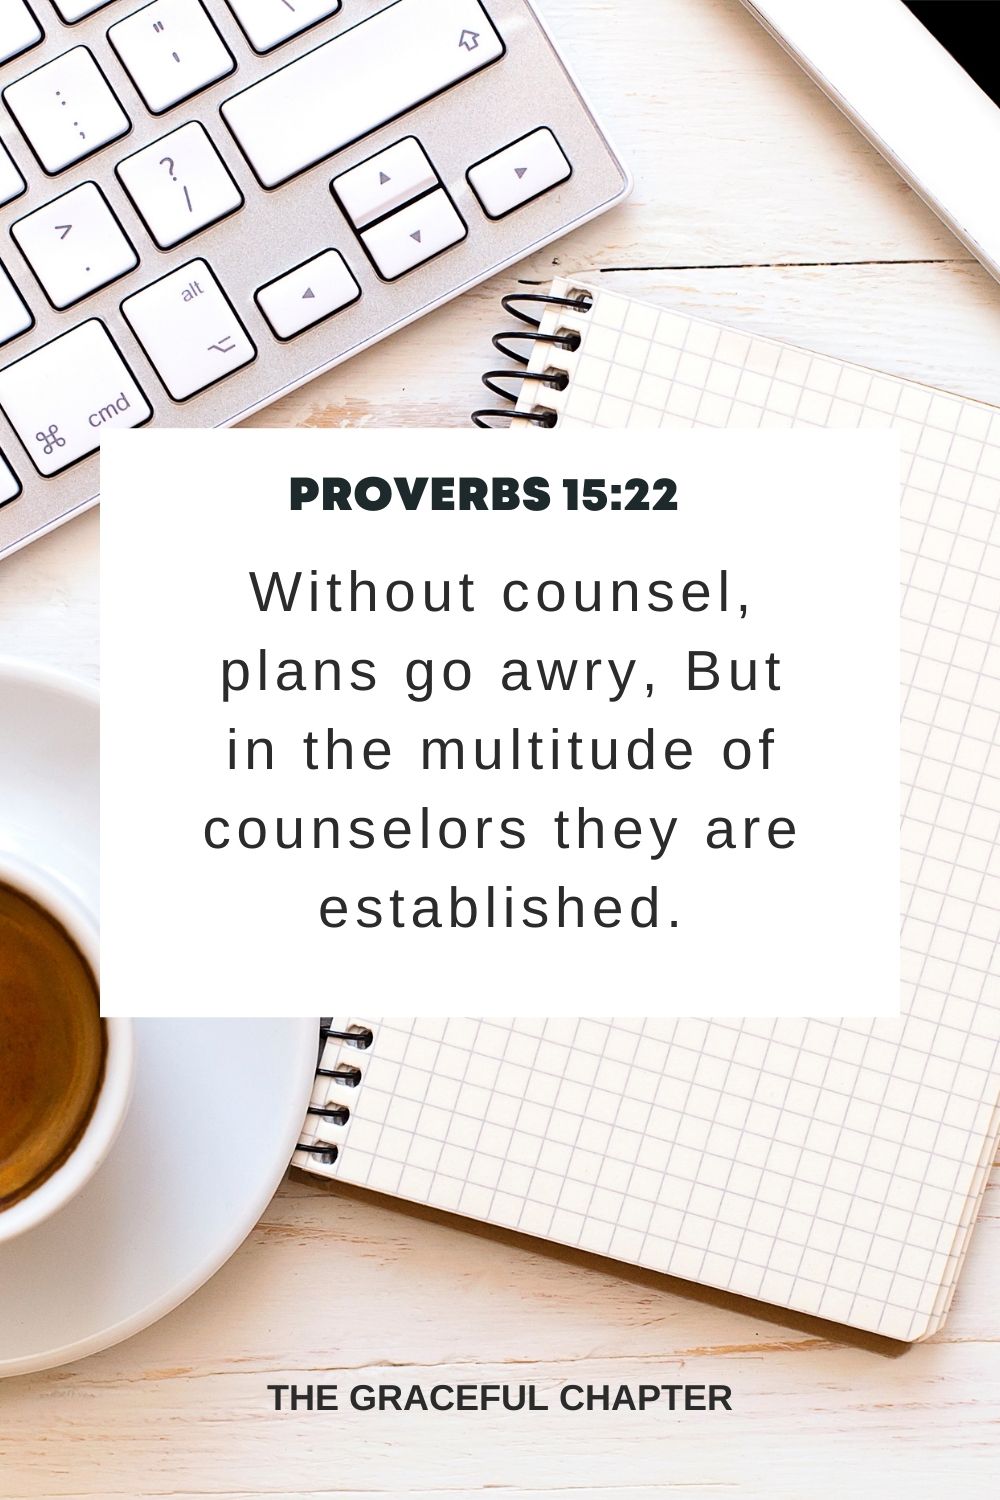 Without counsel, plans go awry, But in the multitude of counselors they are established. Proverbs 15:22